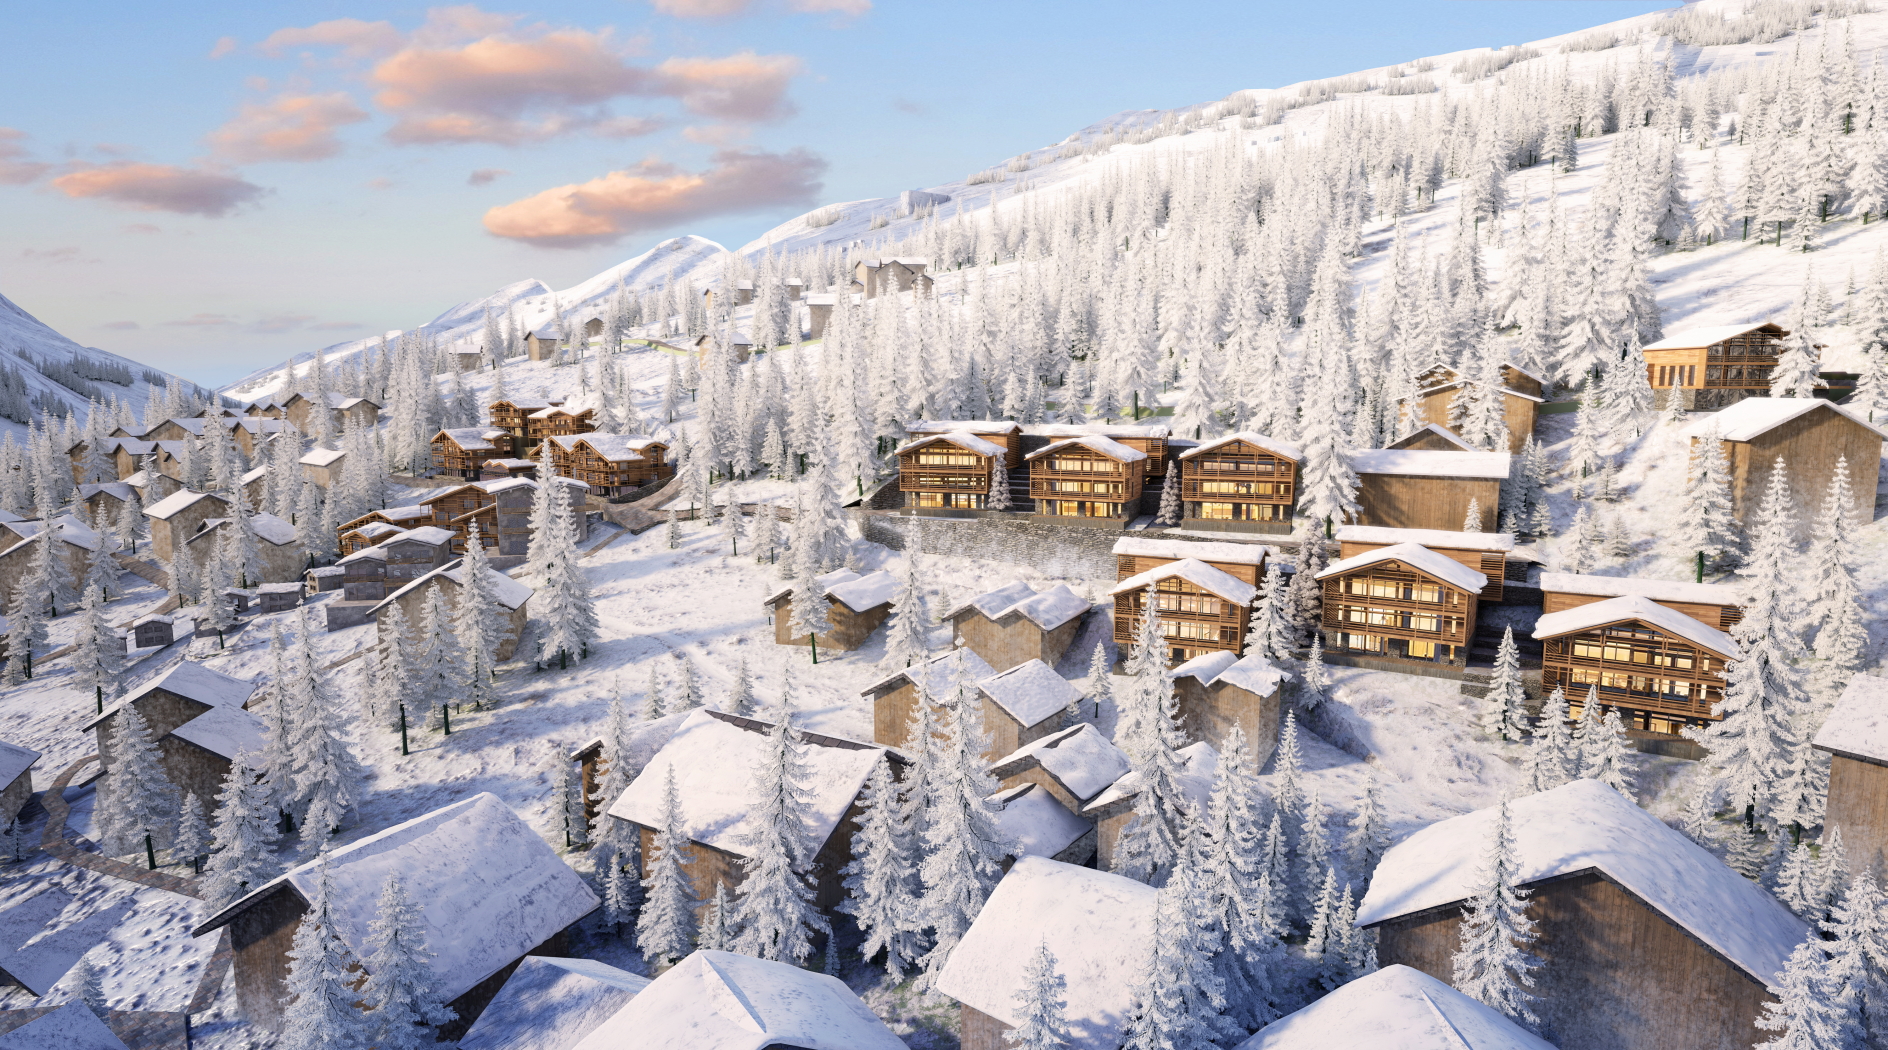 Scheduled to open in 2026, the 69-room Ritz-Carlton, Zermatt will be the first Ritz-Carlton ski resort in Europe and the second Ritz-Carlton hotel in Switzerland, joining The Ritz-Carlton Hotel de la Paix, Geneva. Click to enlarge.